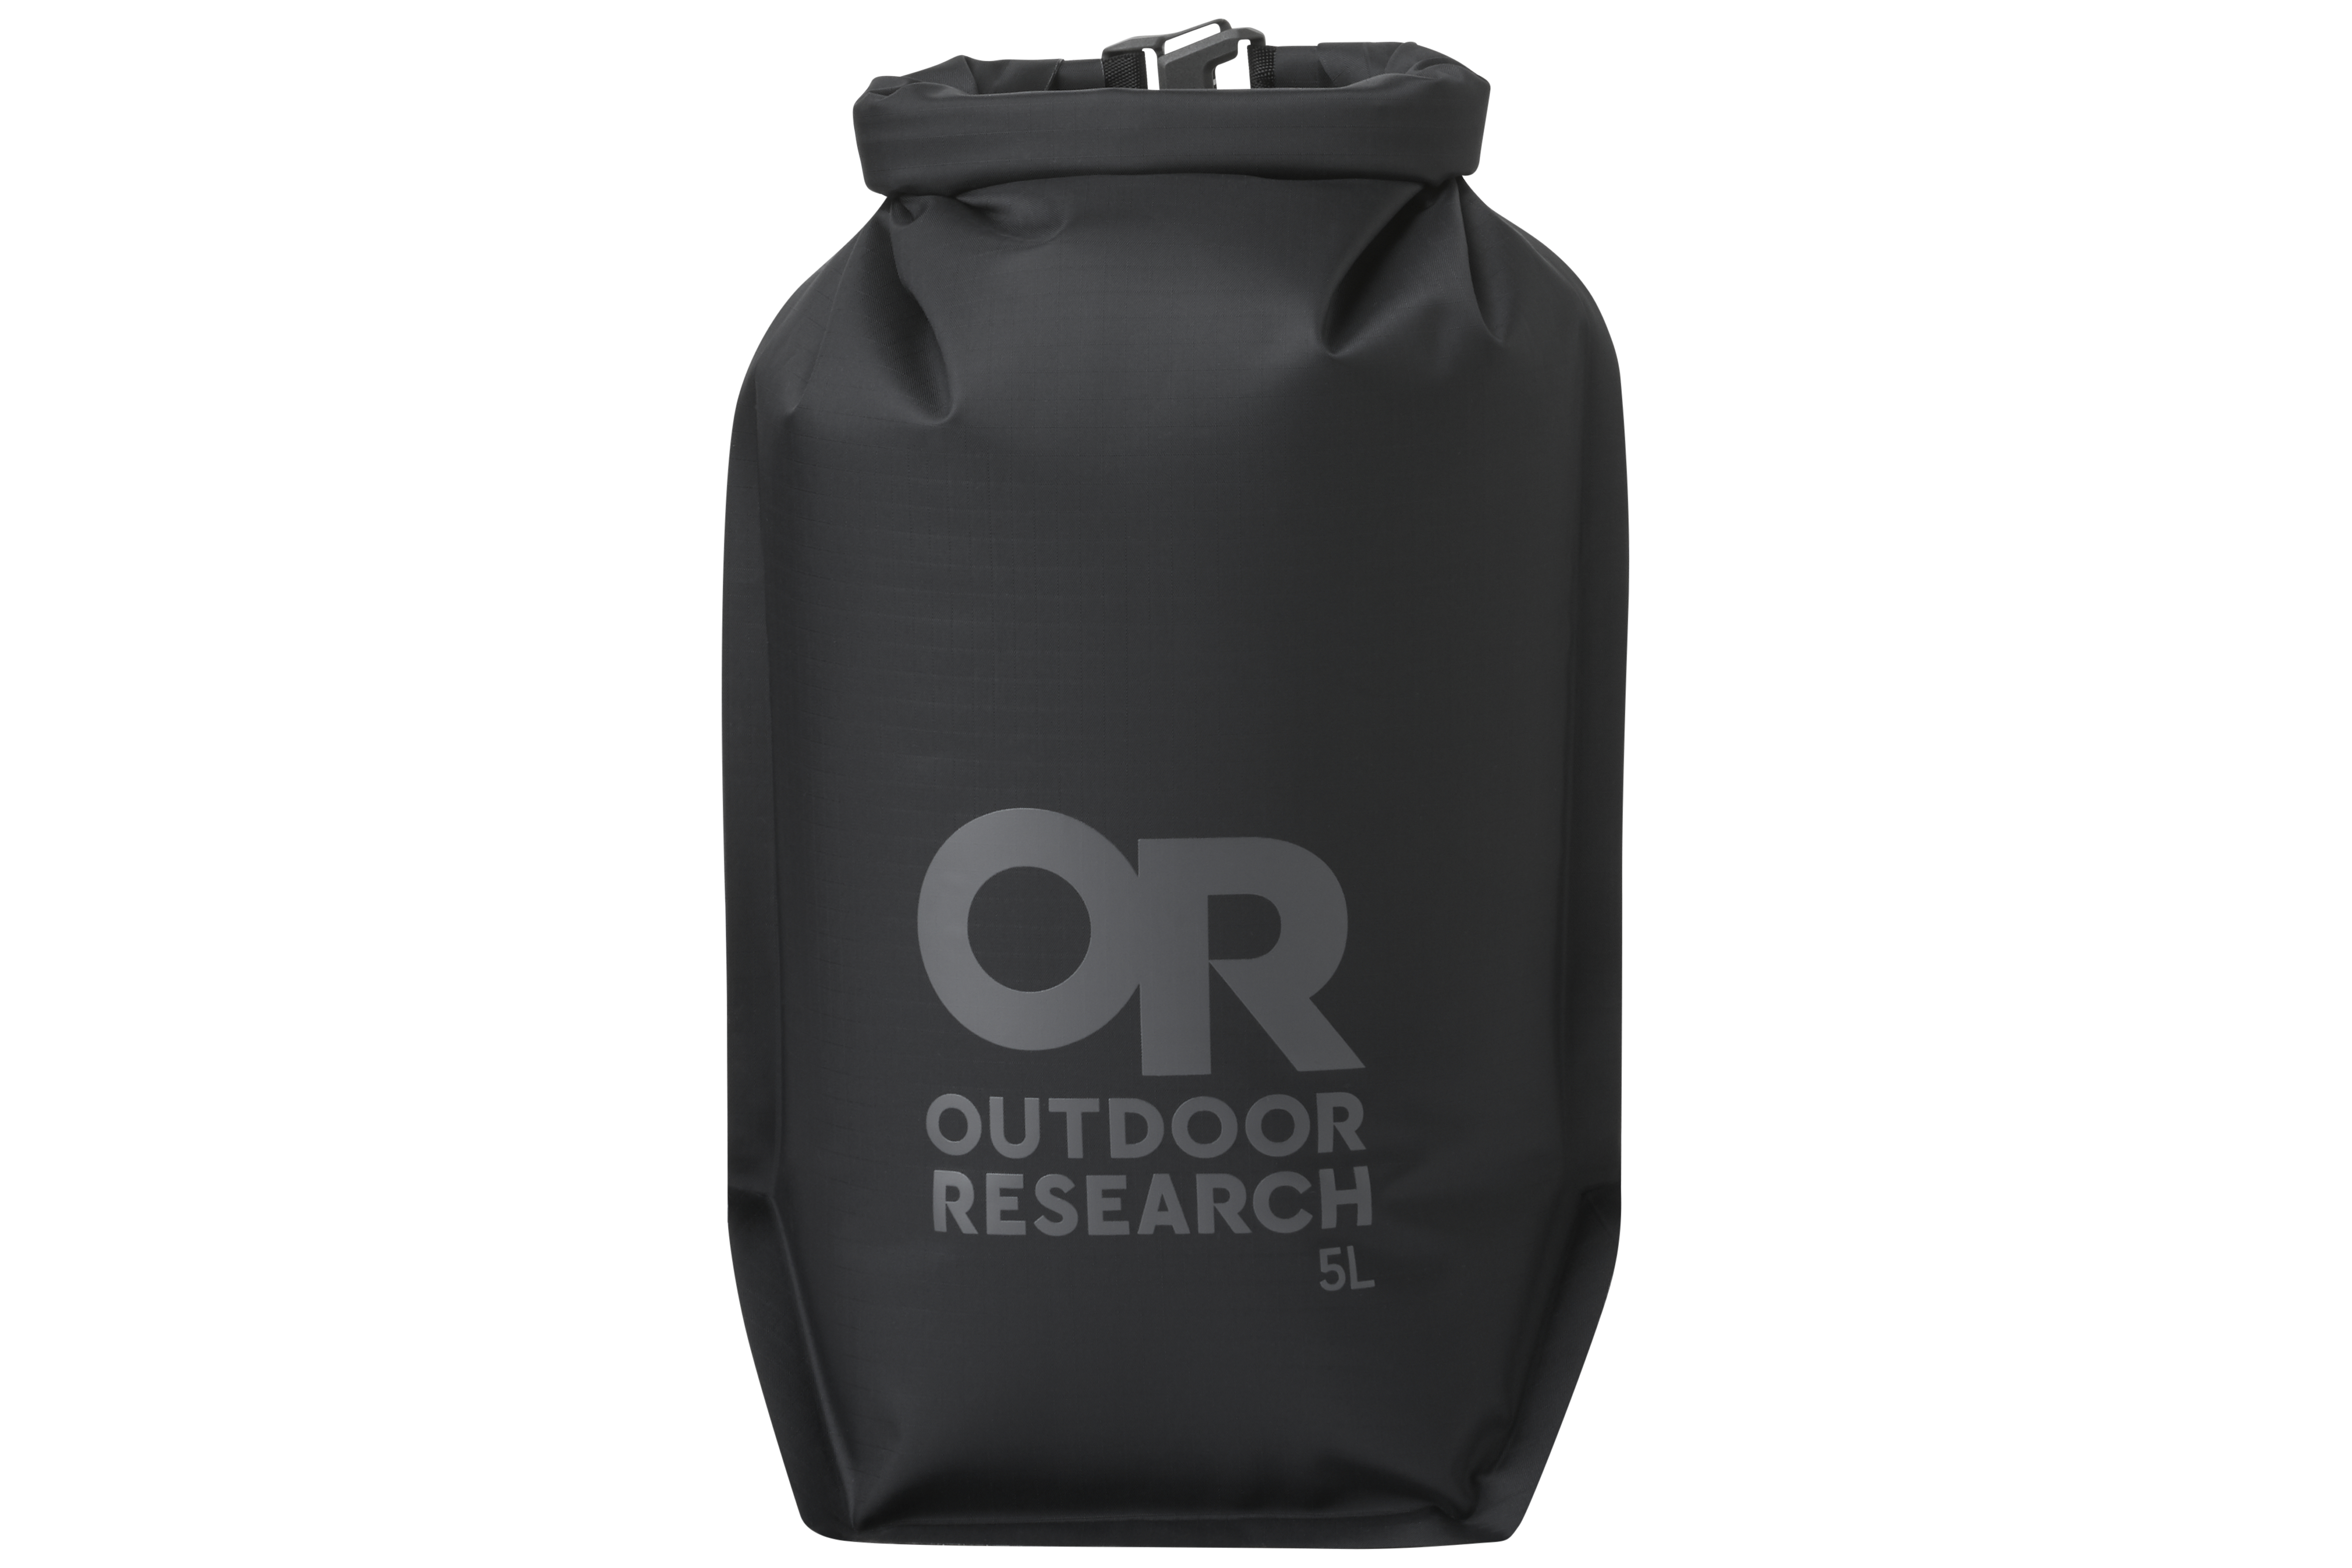 Outdoor Research CarryOut Dry Bag